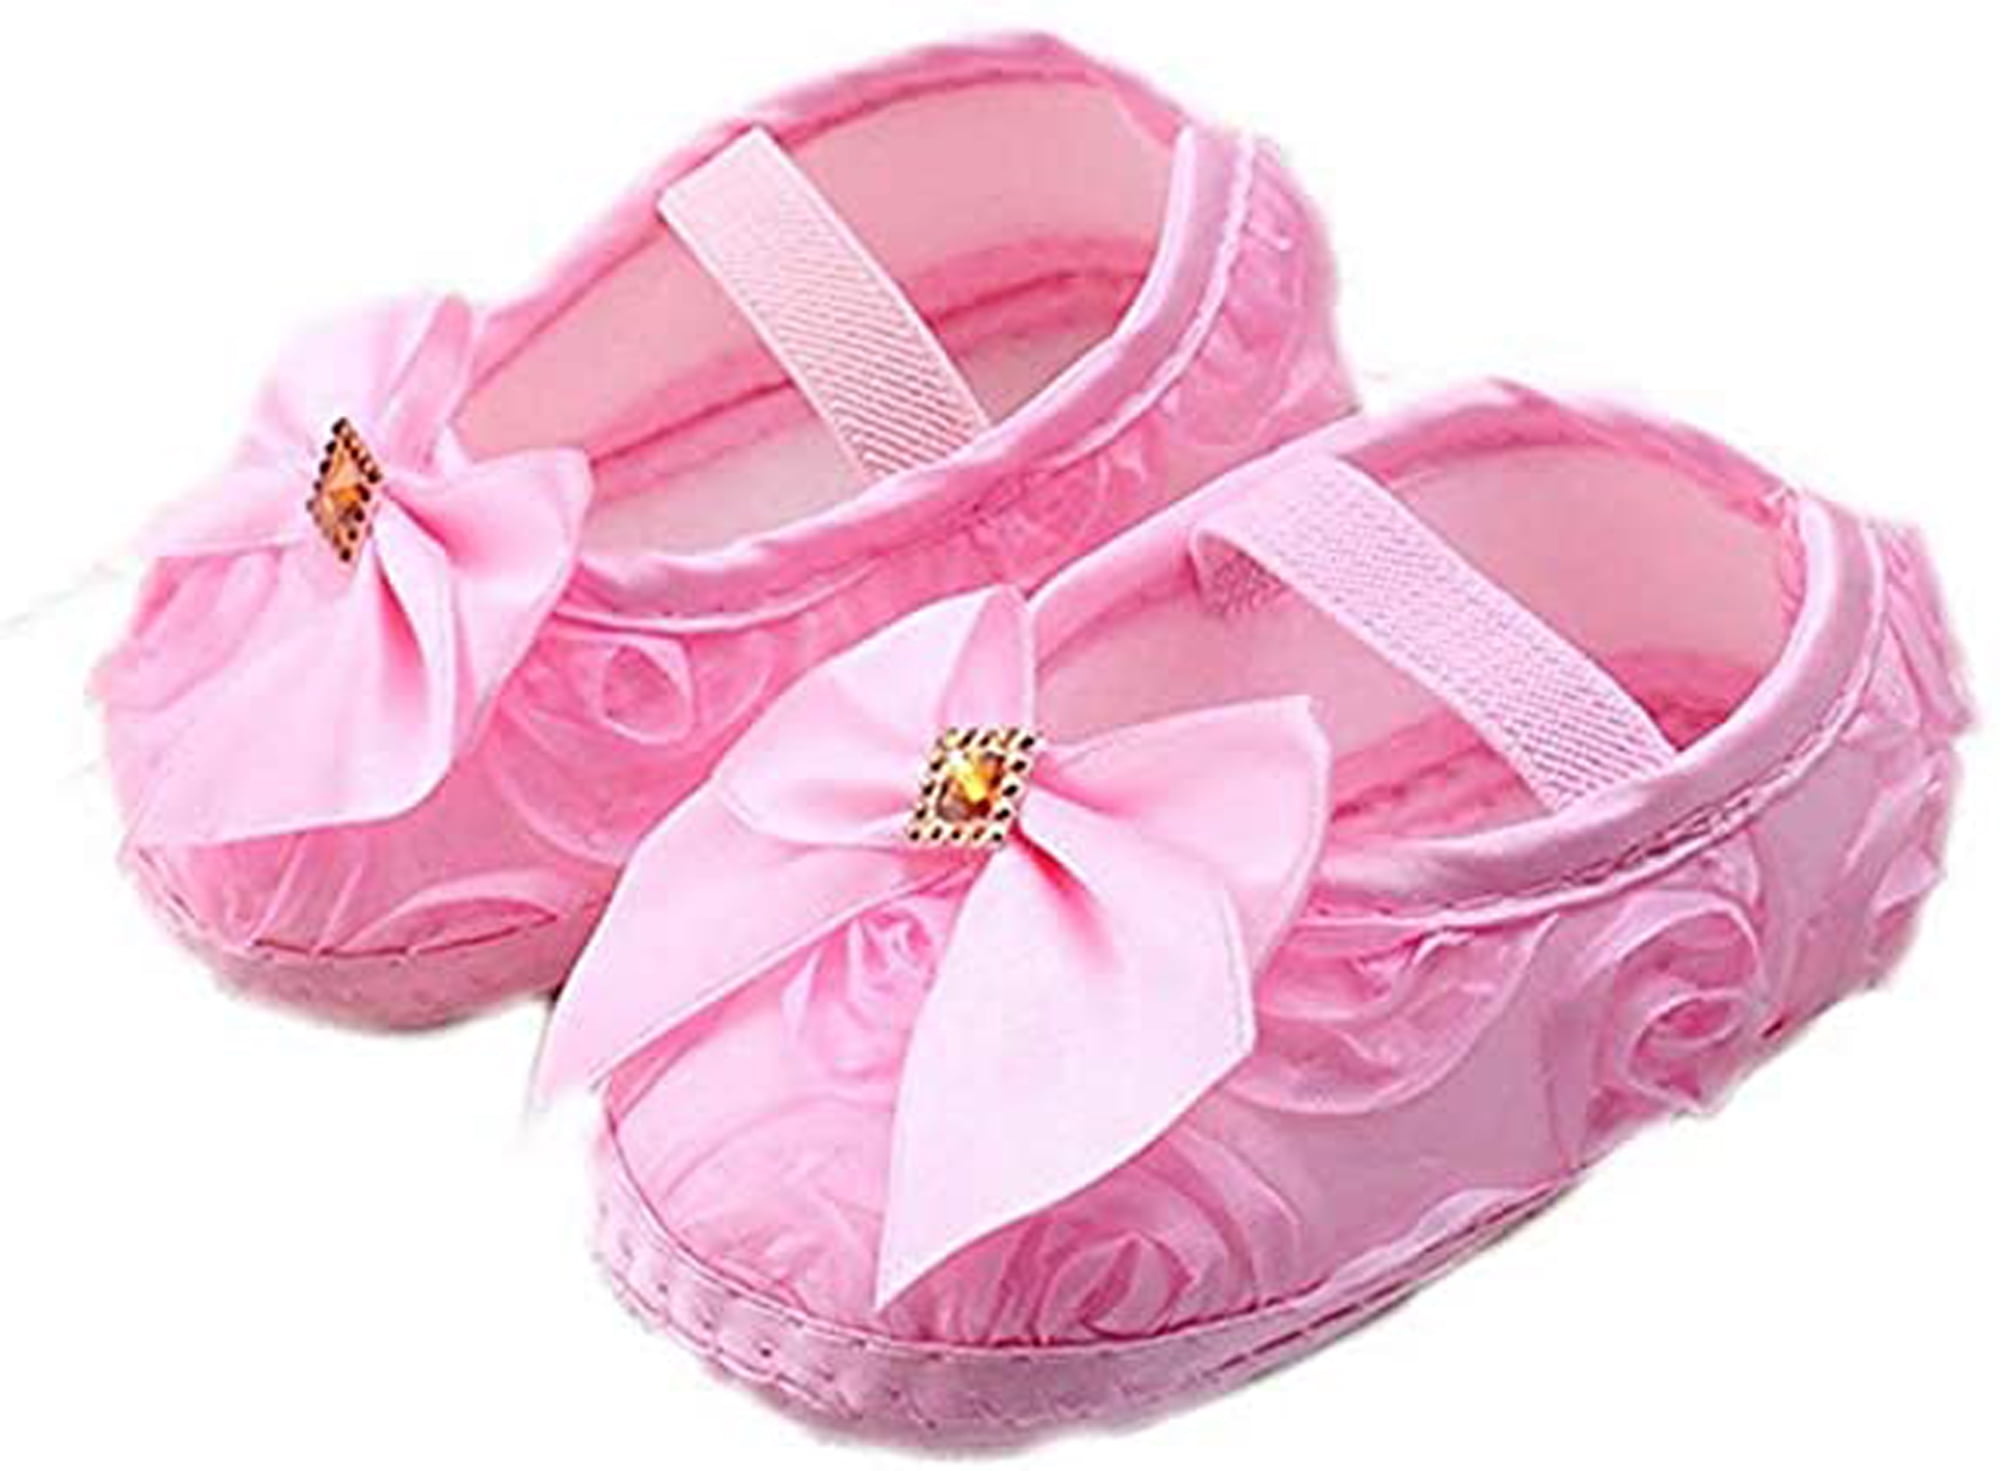 Willbeth Baby shoes with Bow Details, Size 0-4-WIL63463